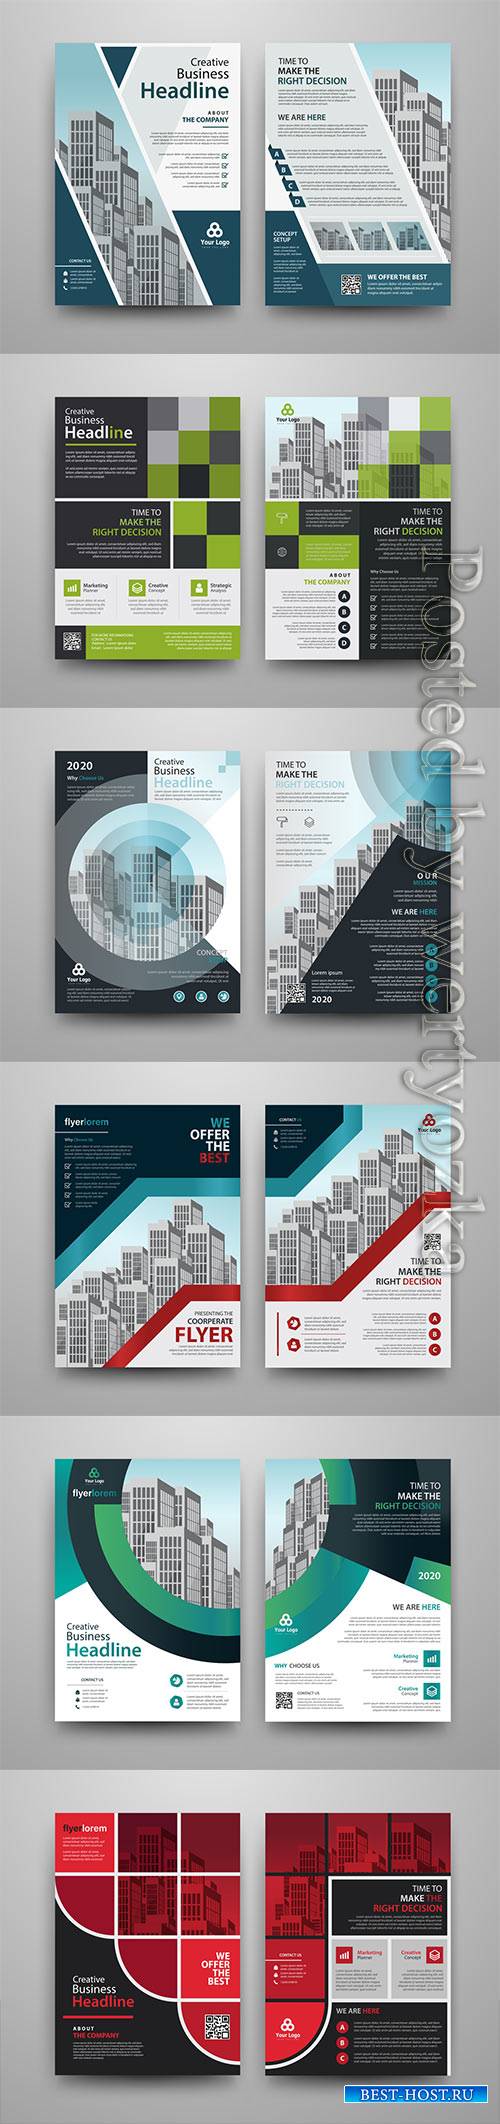 Business vector template for brochure, annual report, magazine # 18